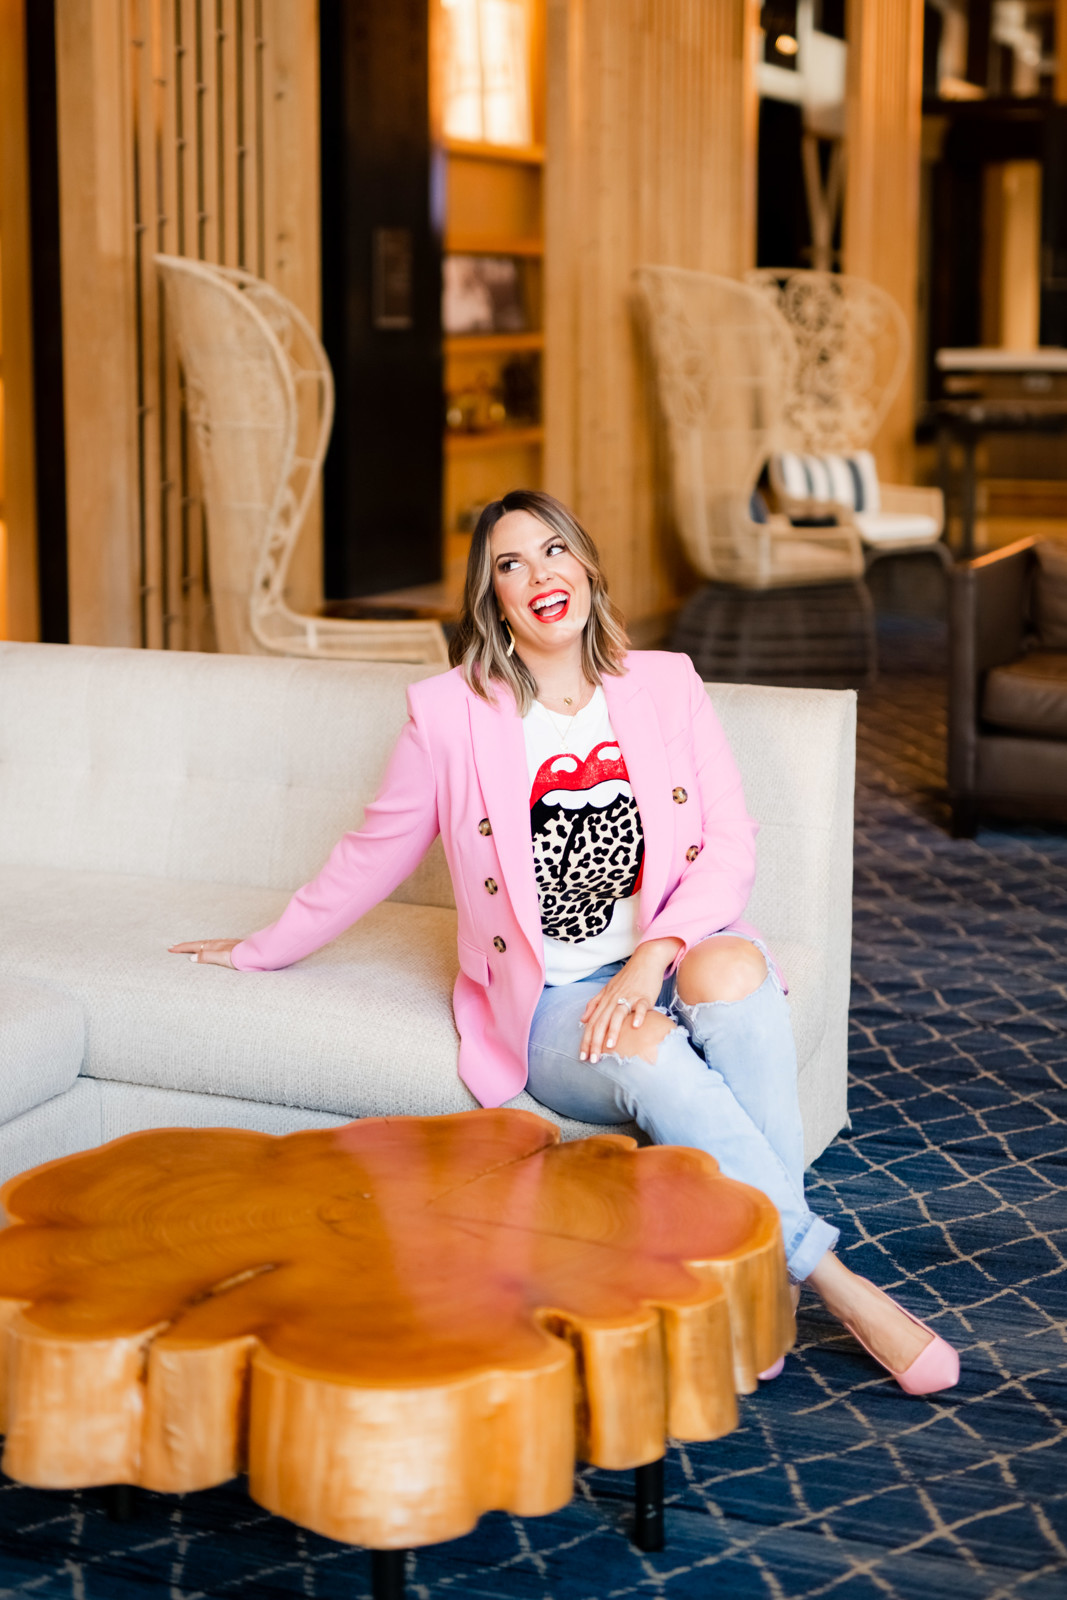 Woman wearing a pink jacket sitting in a lounge area, looking away from the camera and smiling.
